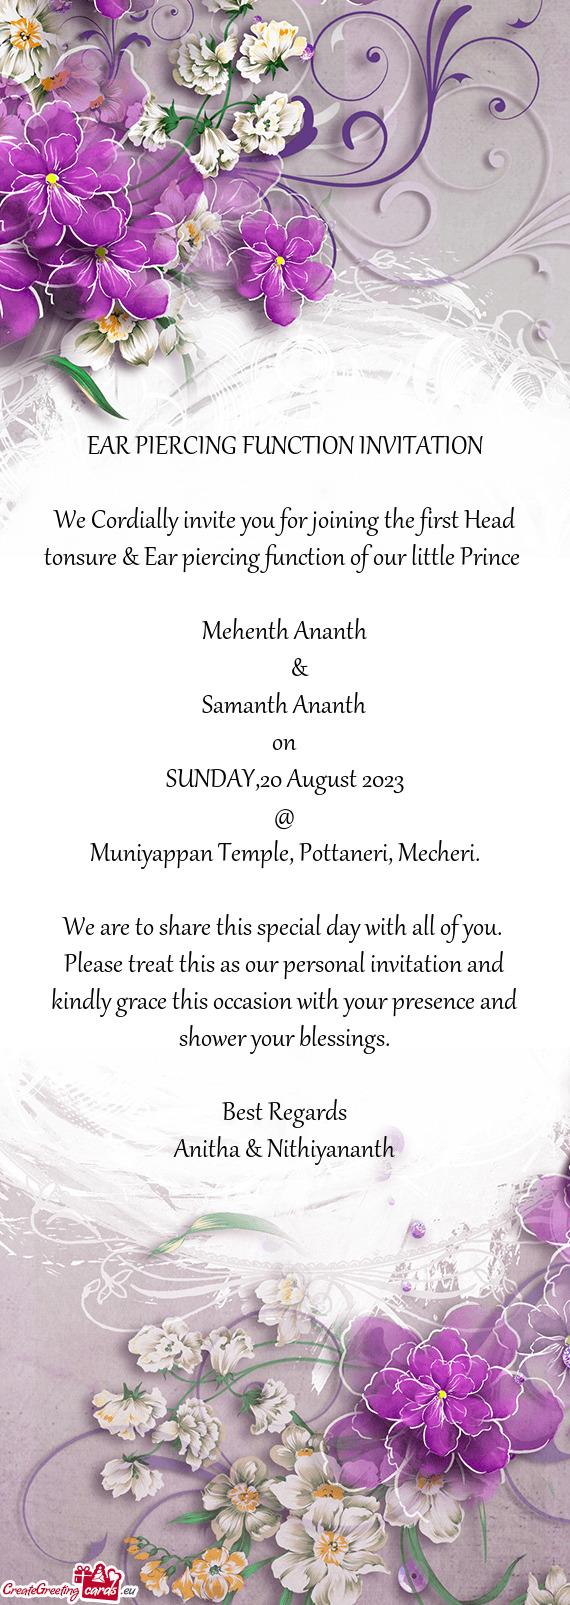 We Cordially invite you for joining the first Head tonsure & Ear piercing function of our little Pri